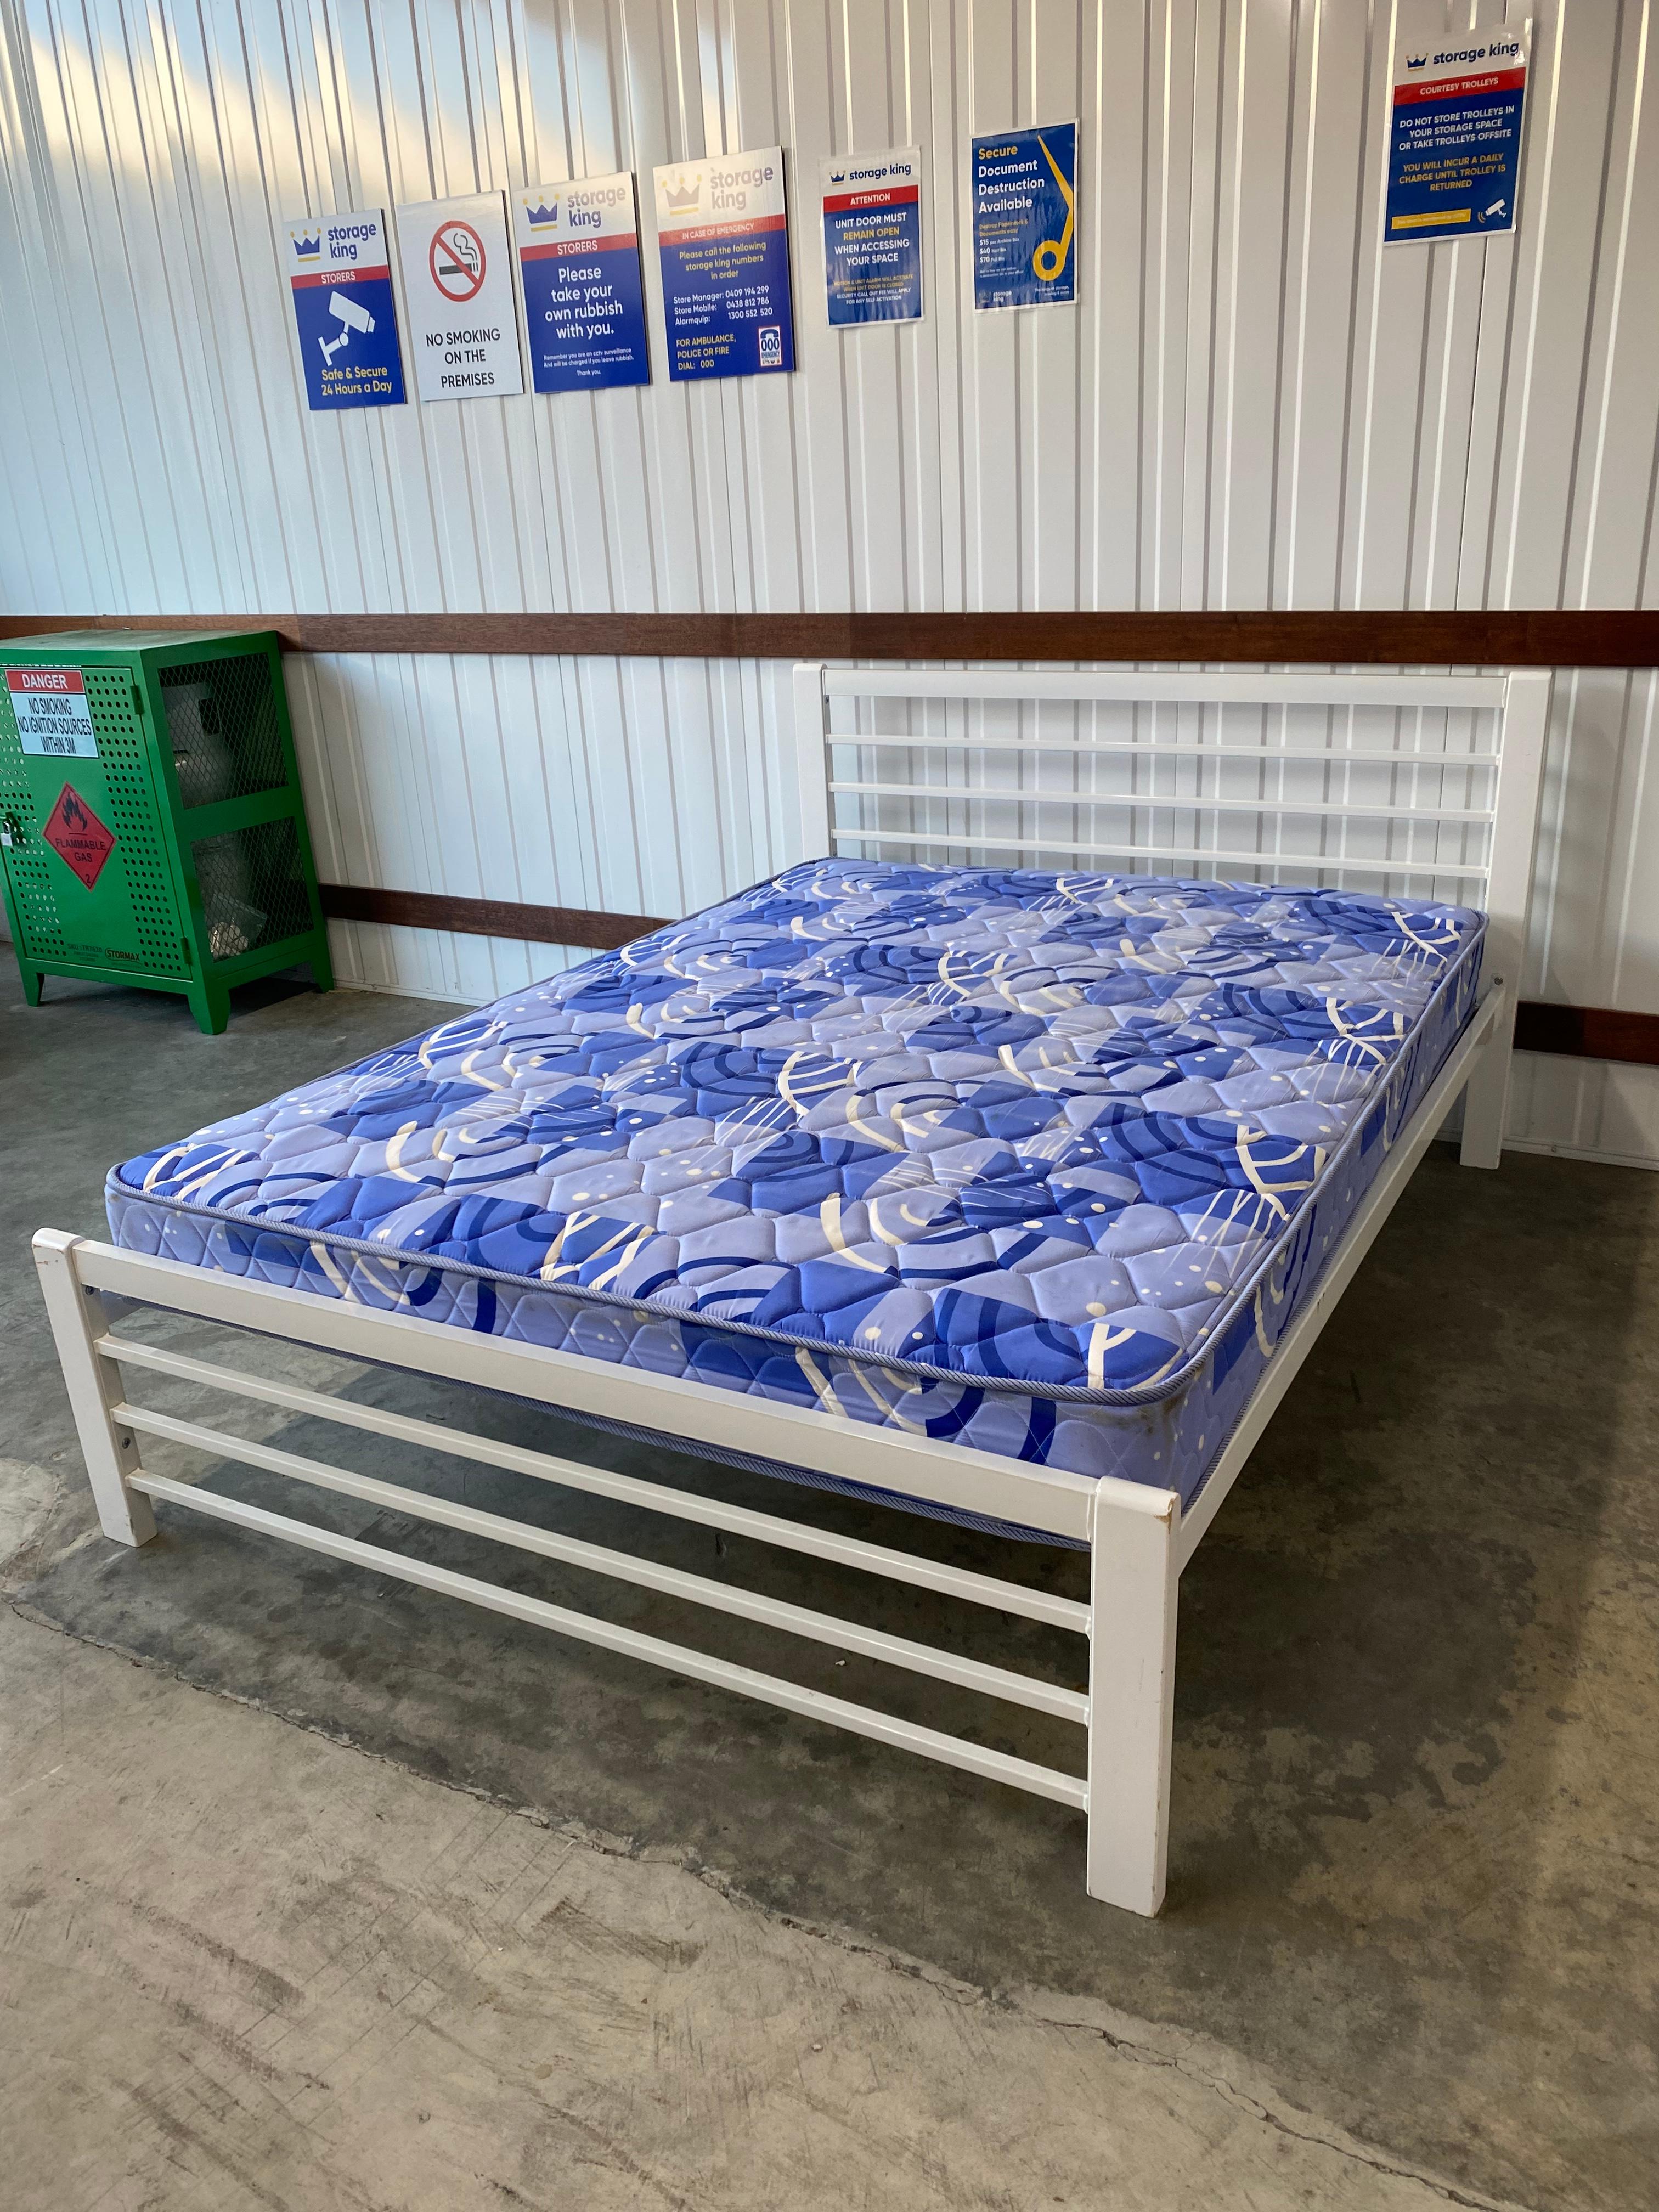 WHITE IRON BED AND BLUE MATTRESS